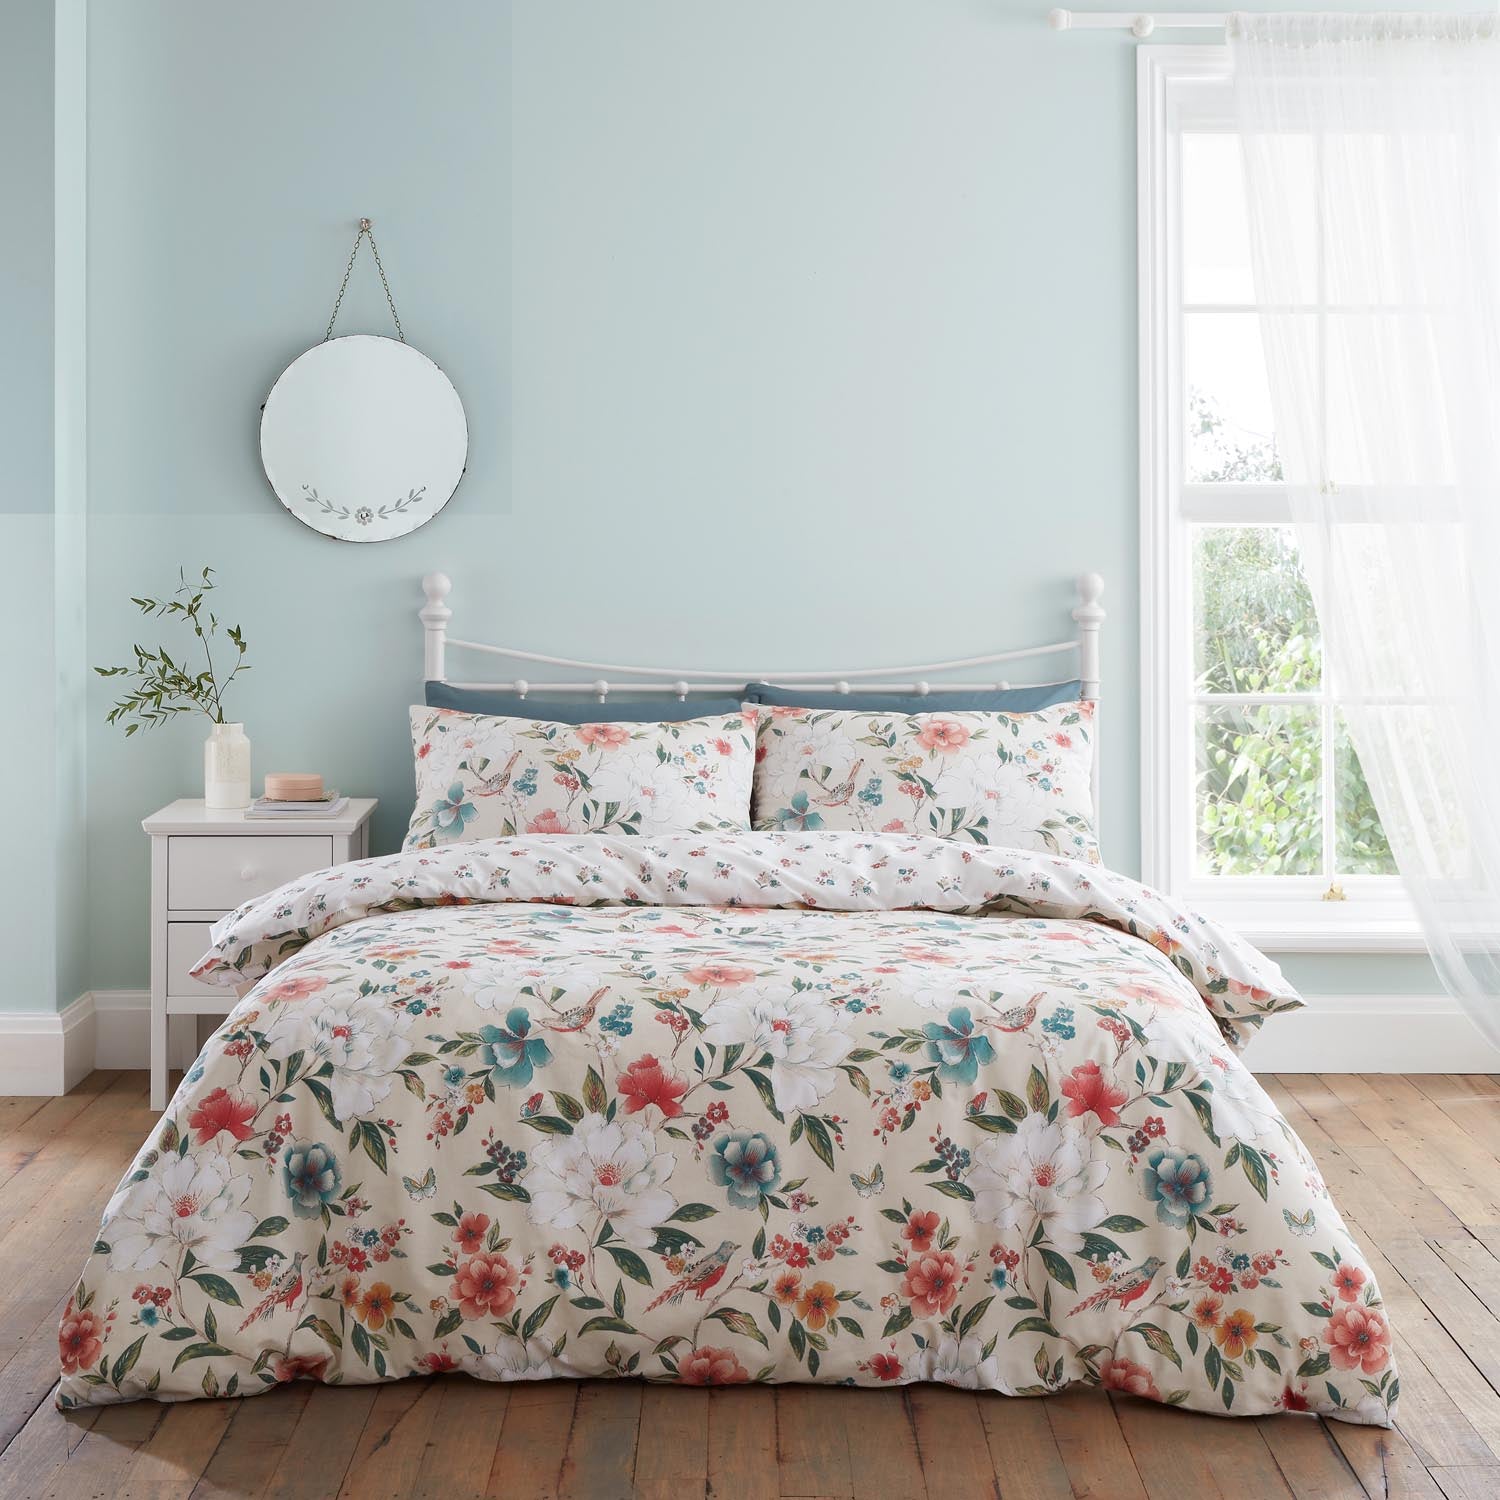 The Home Luxury Collection Eilley Floral Birds Duvet Cover 1 Shaws Department Stores